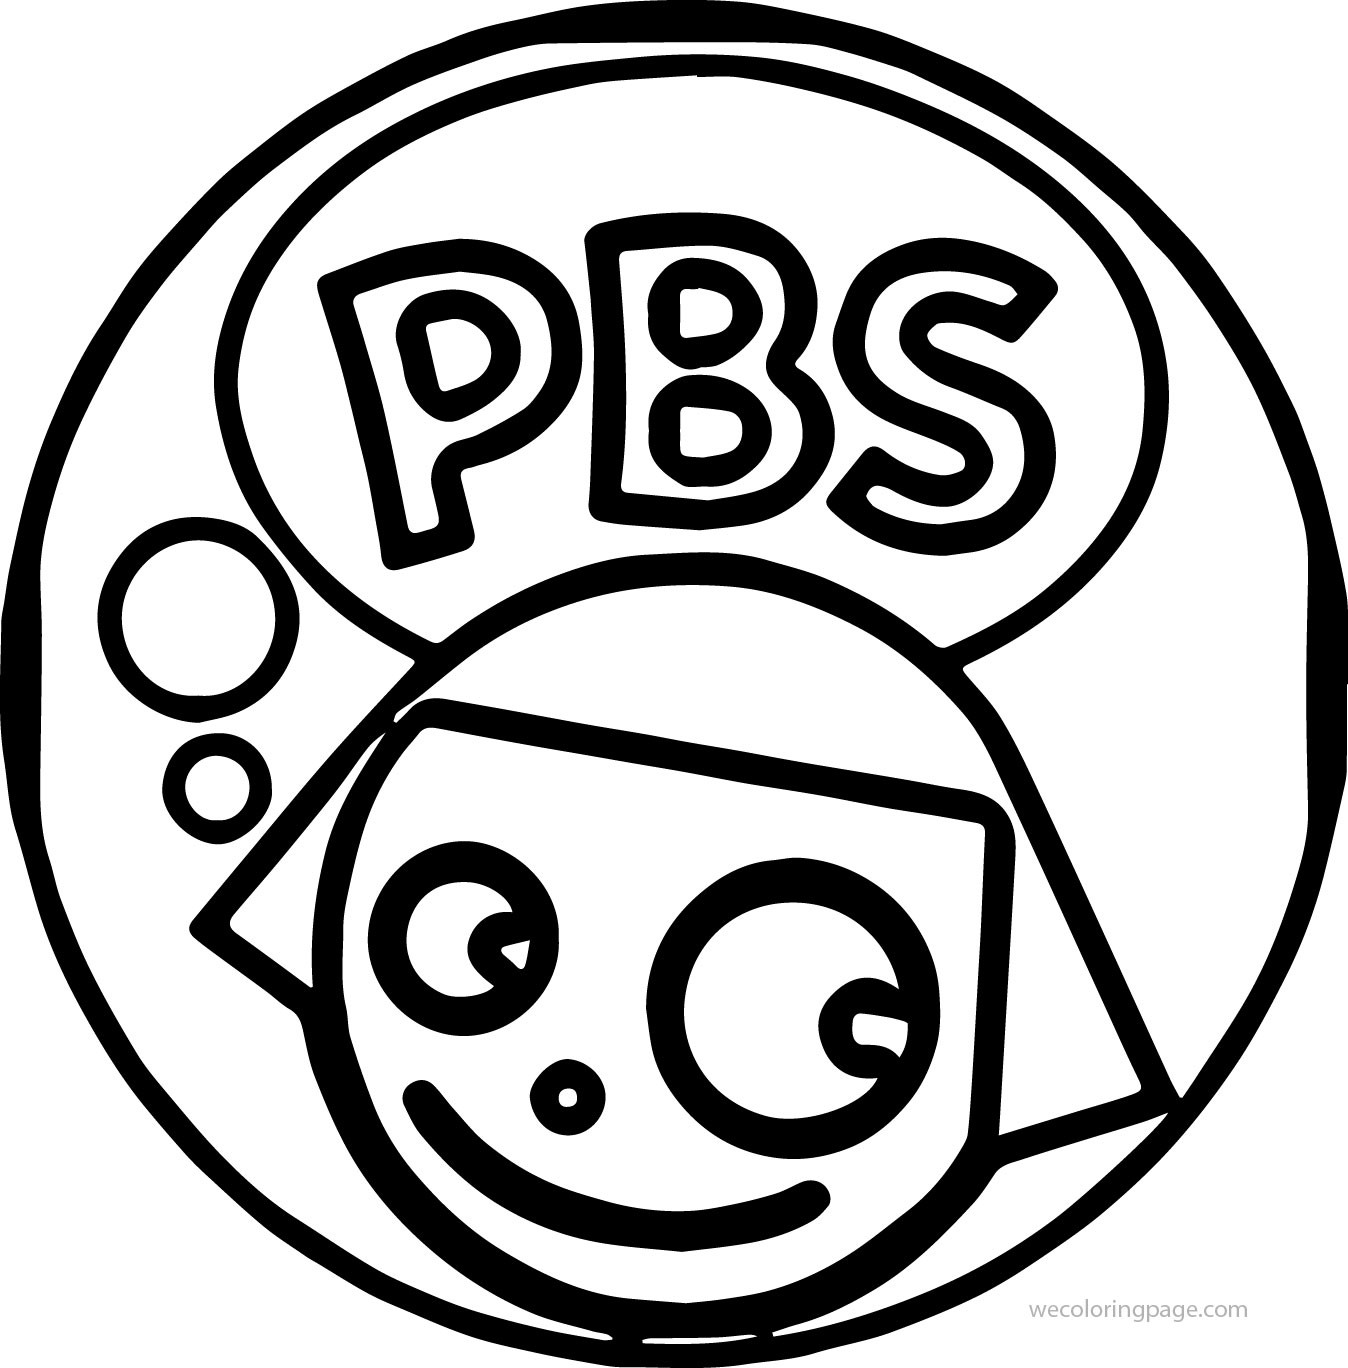 Pbskids.Org Coloring Pages
 Pbs Kids Coloring Pages for Kids